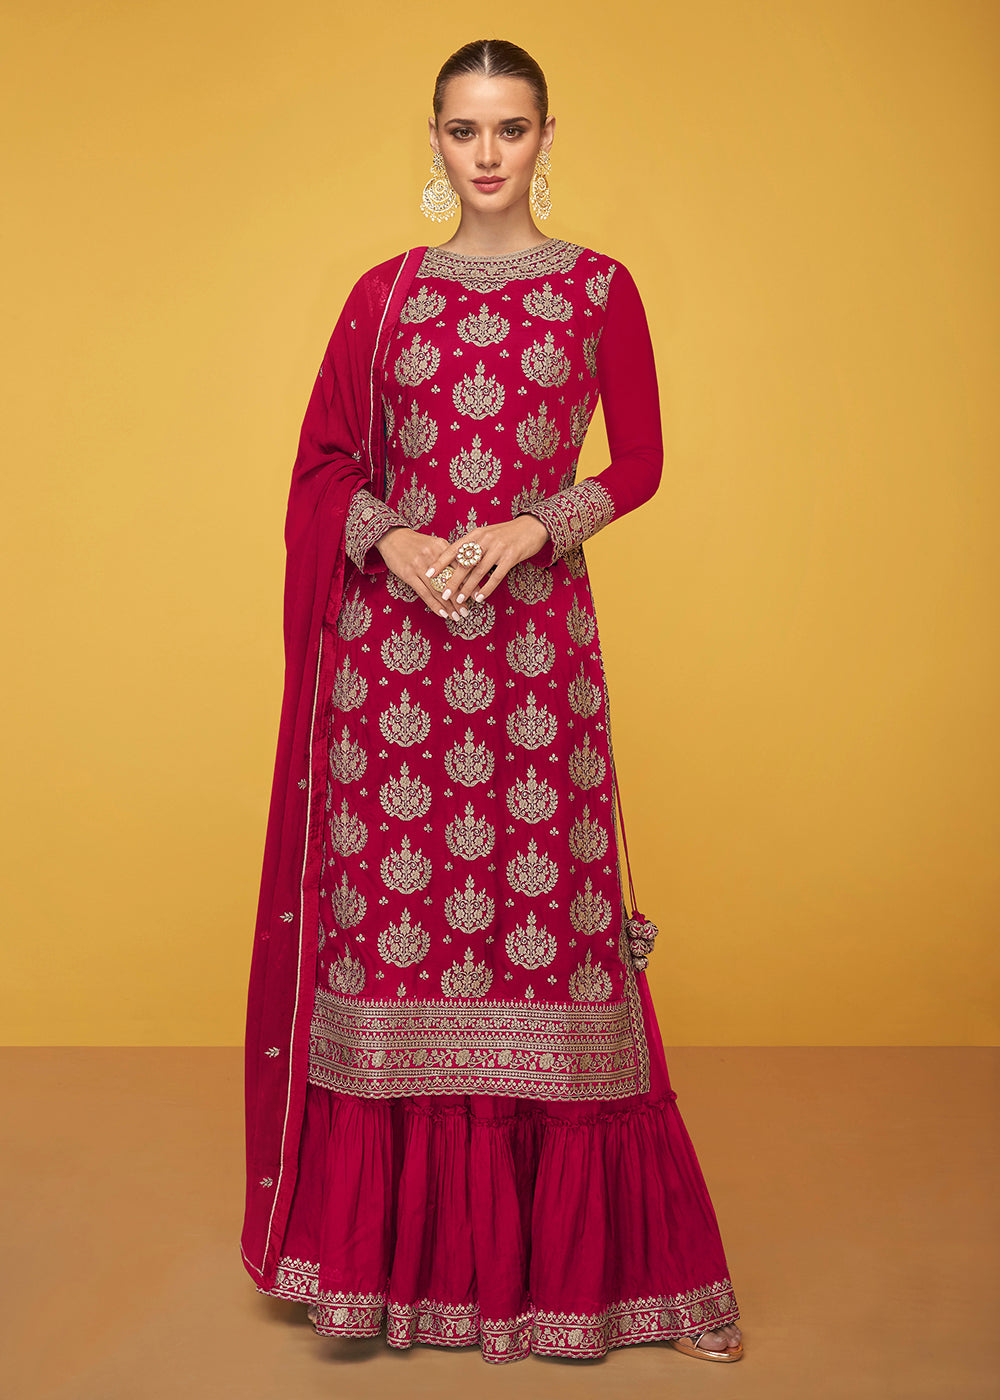 Buy Now Pure Georgette Precious Hot Pink Designer Palazzo Salwar Suit Online in USA, UK, Canada, Germany & Worldwide at Empress Clothing.